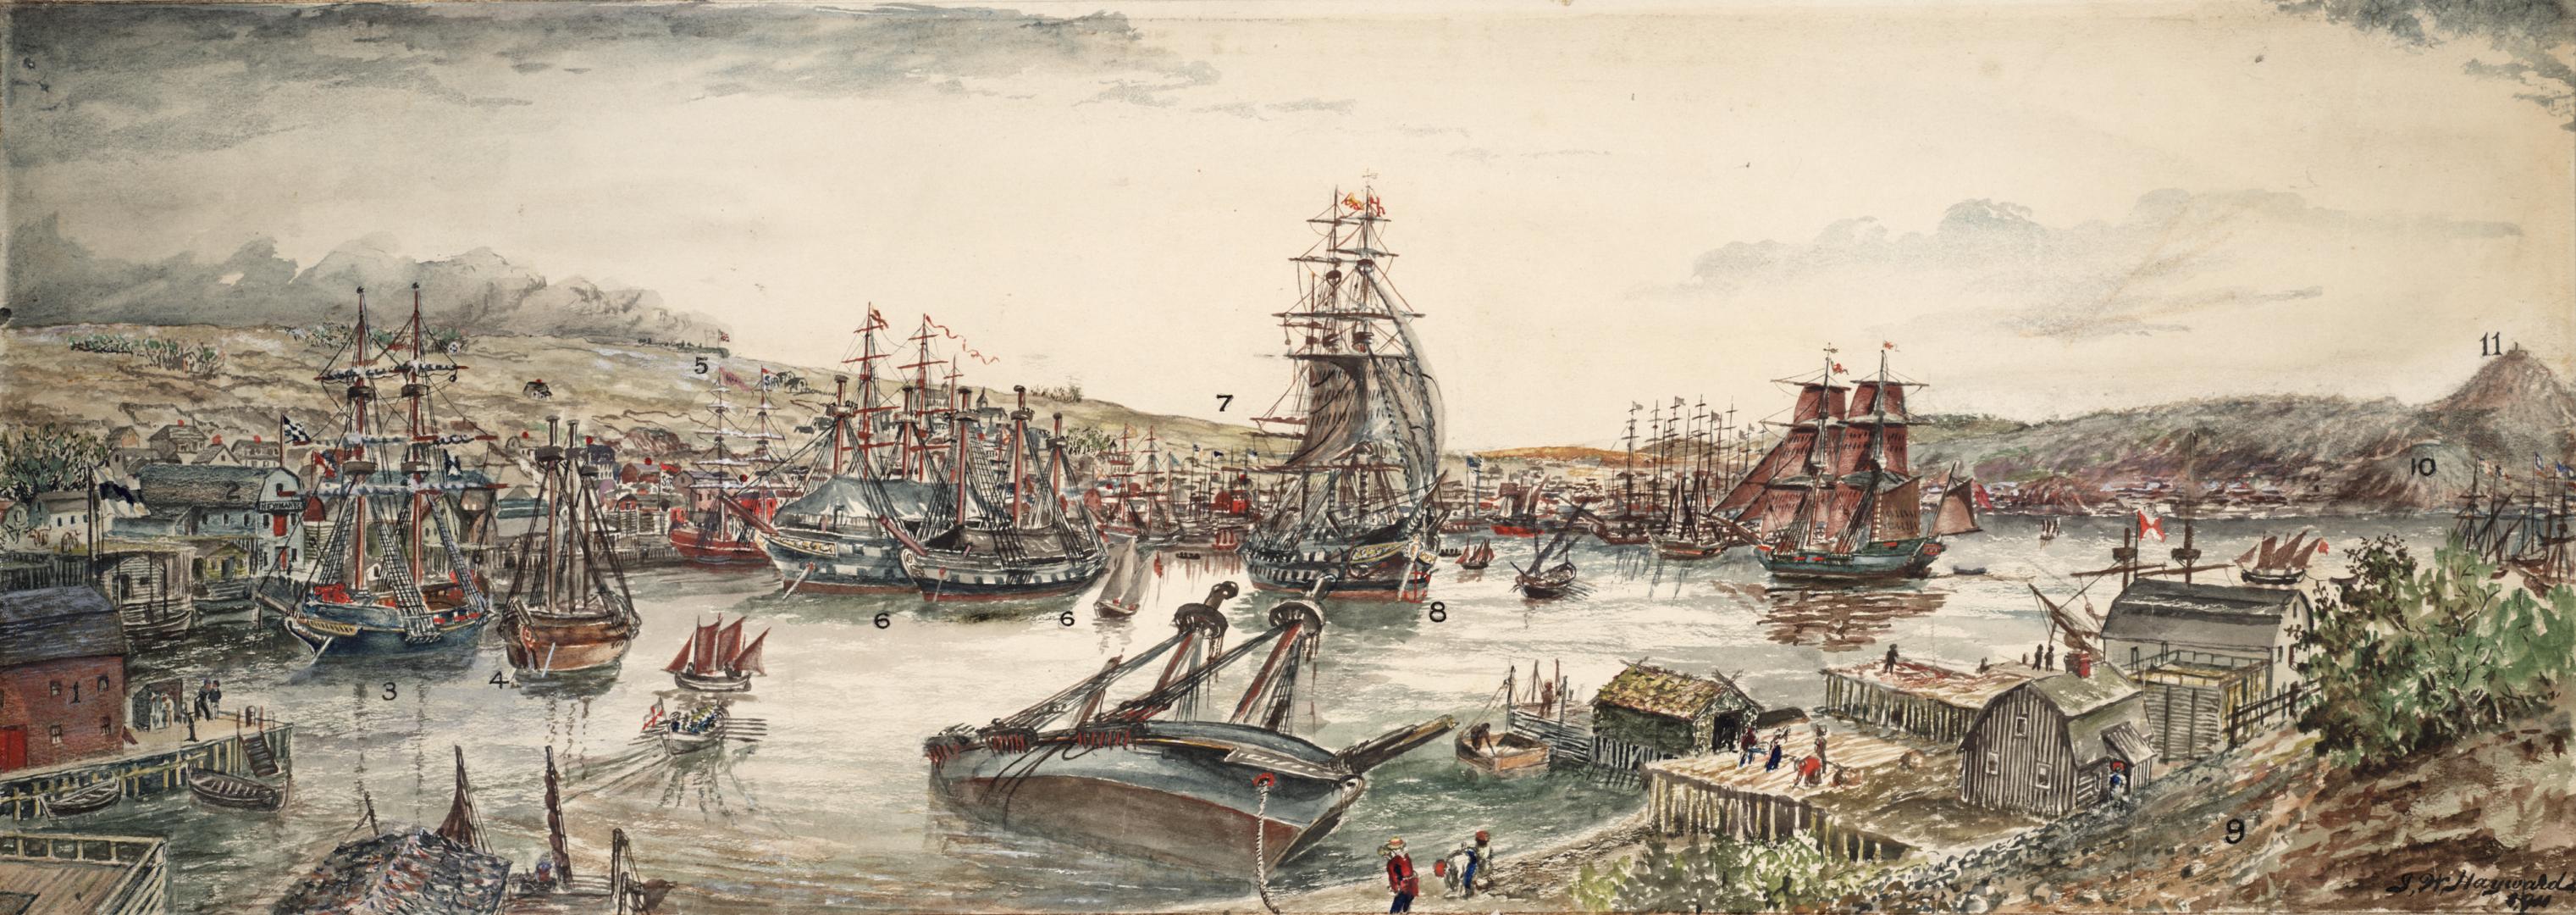 Town and Harbour of St. John's, Newfoundland, in 1811